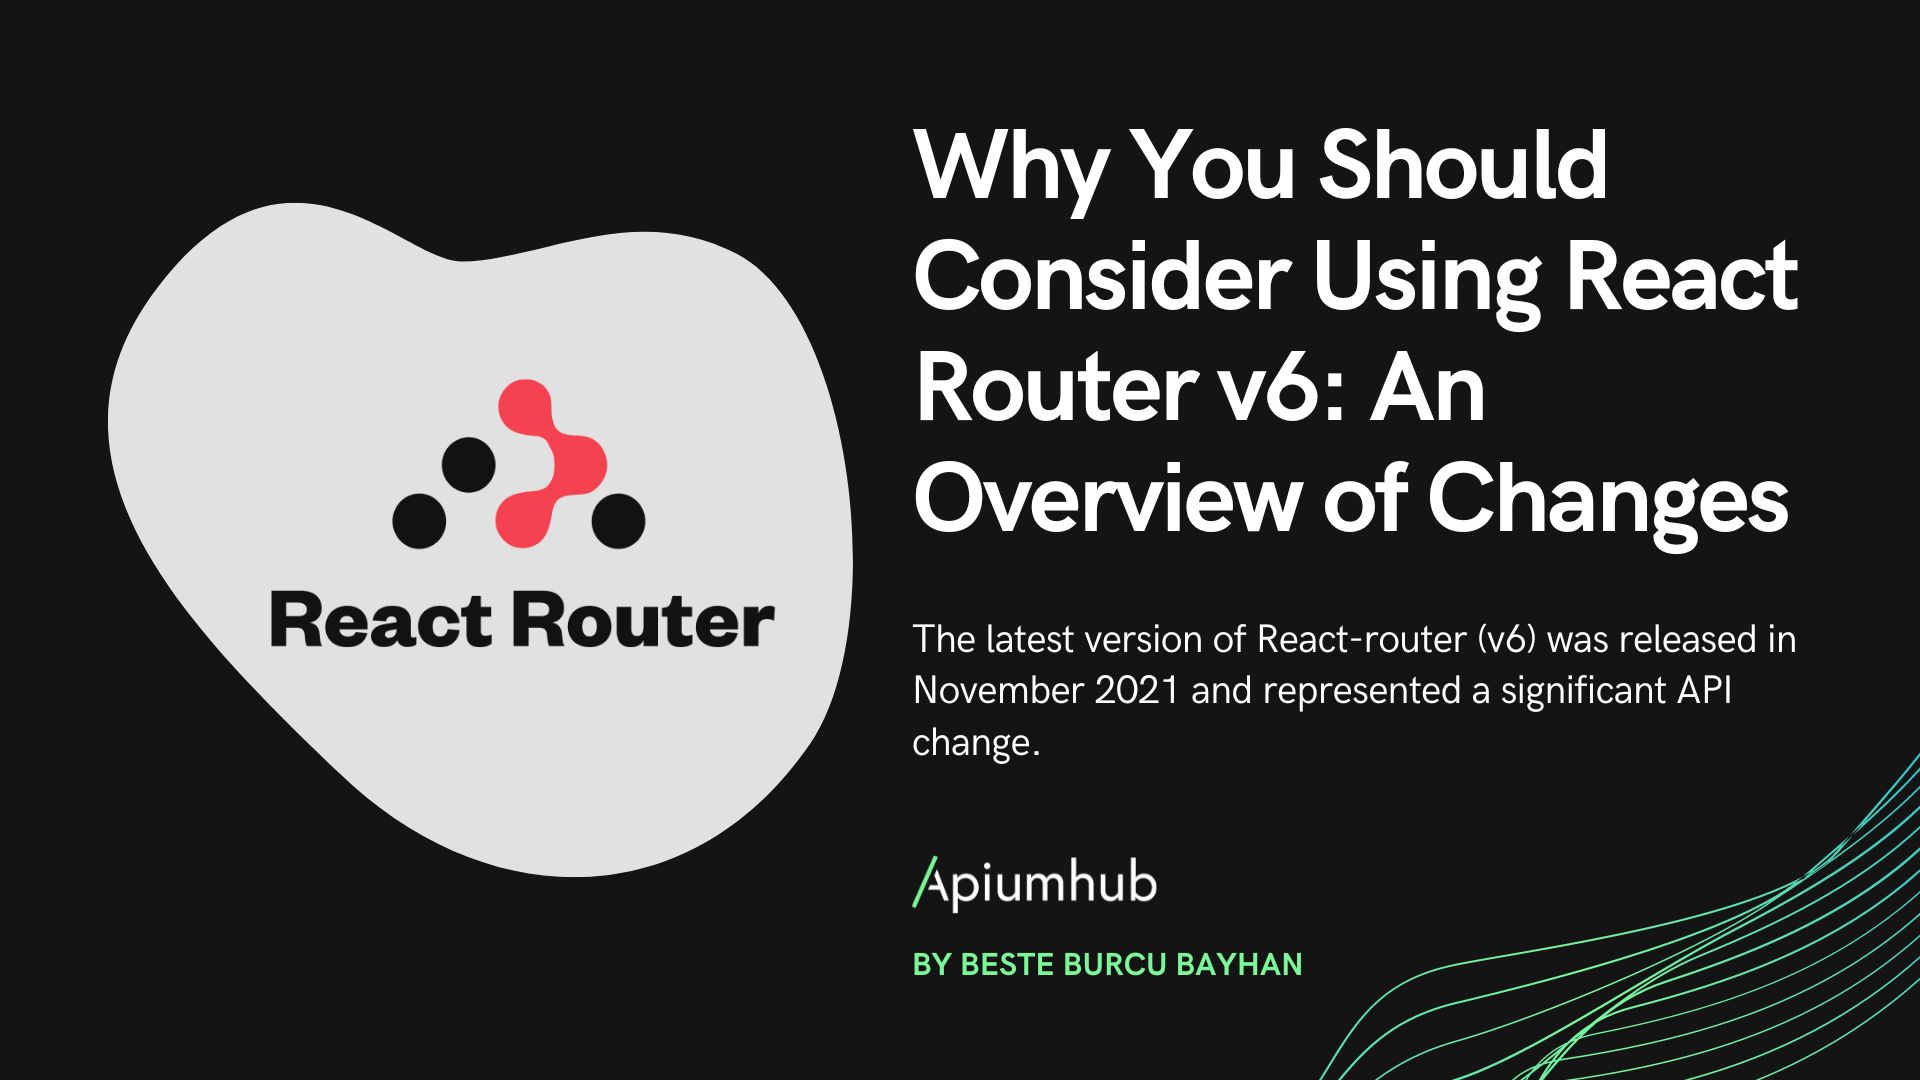 Why you should consider using react router v6: an overview of changes